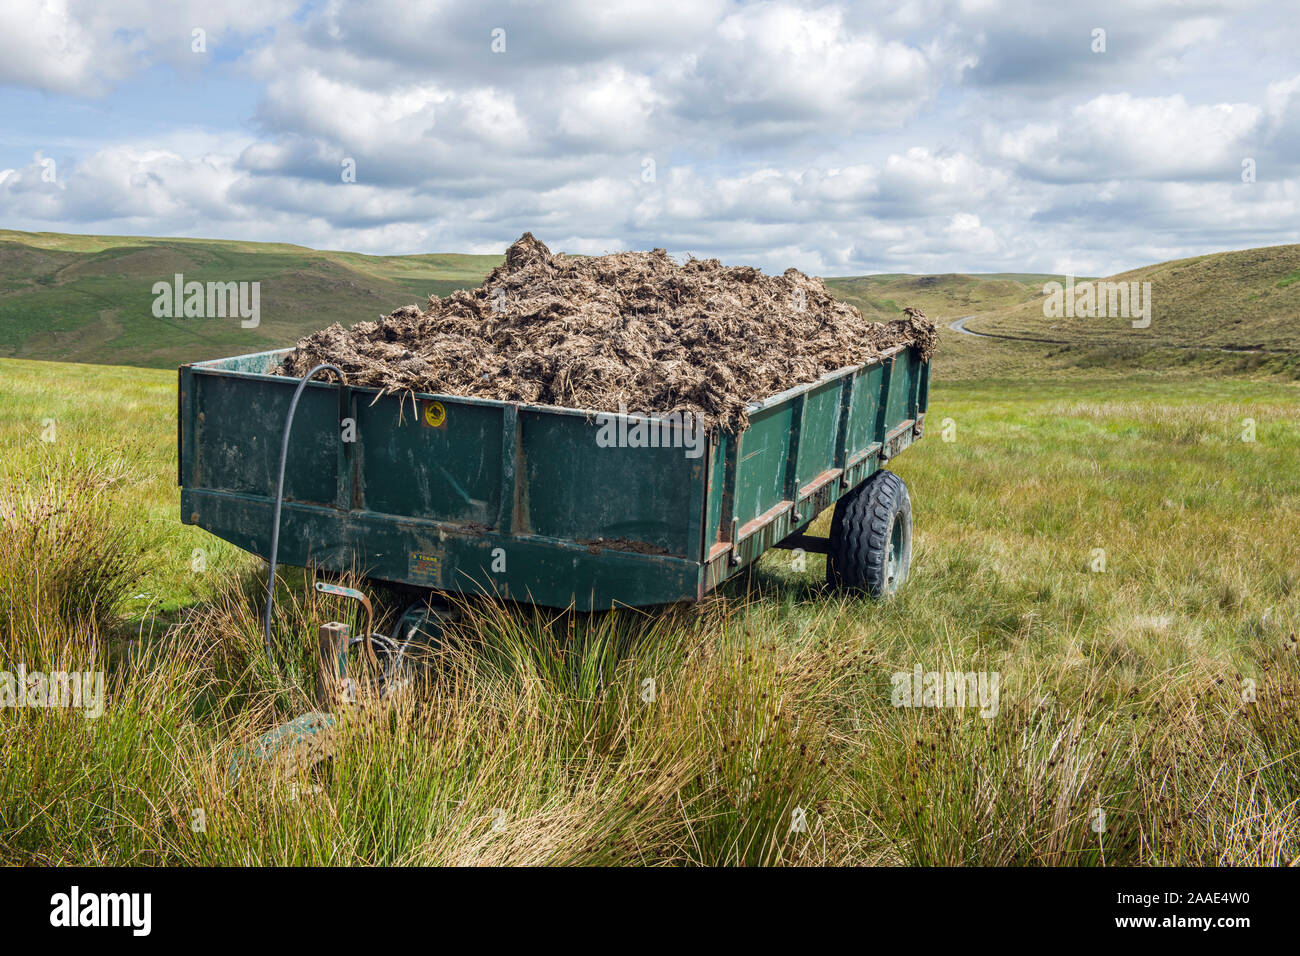 A farm trailer on the Cambrian Mountains full of manure in West Wales Stock Photo